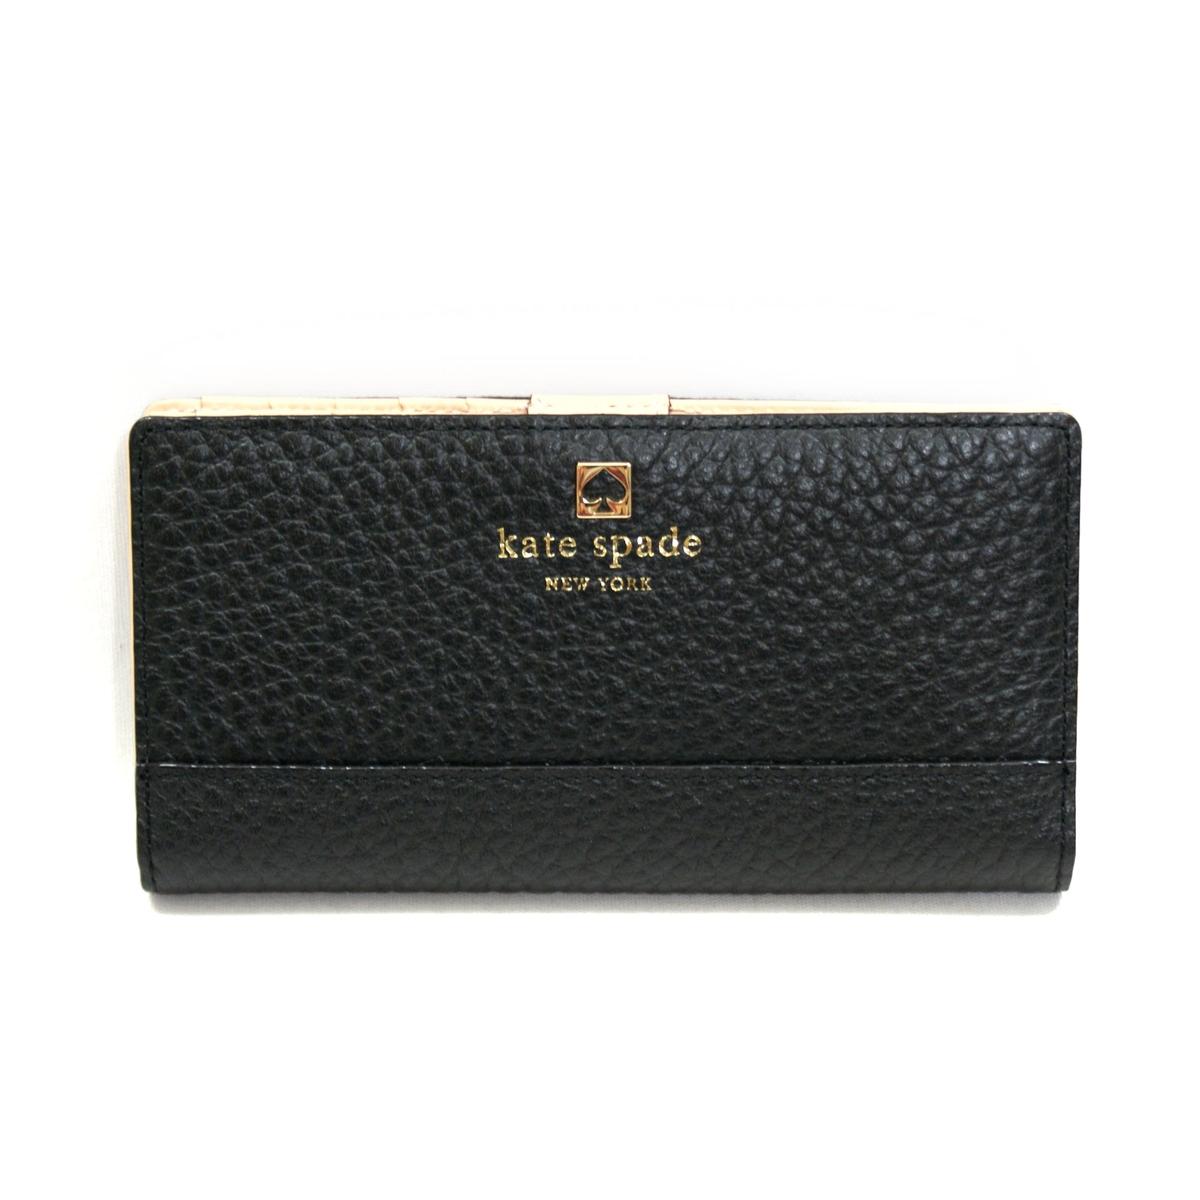 Kate Spade Stacy Southport Avenue Black Leather Wallet/ Clutch #